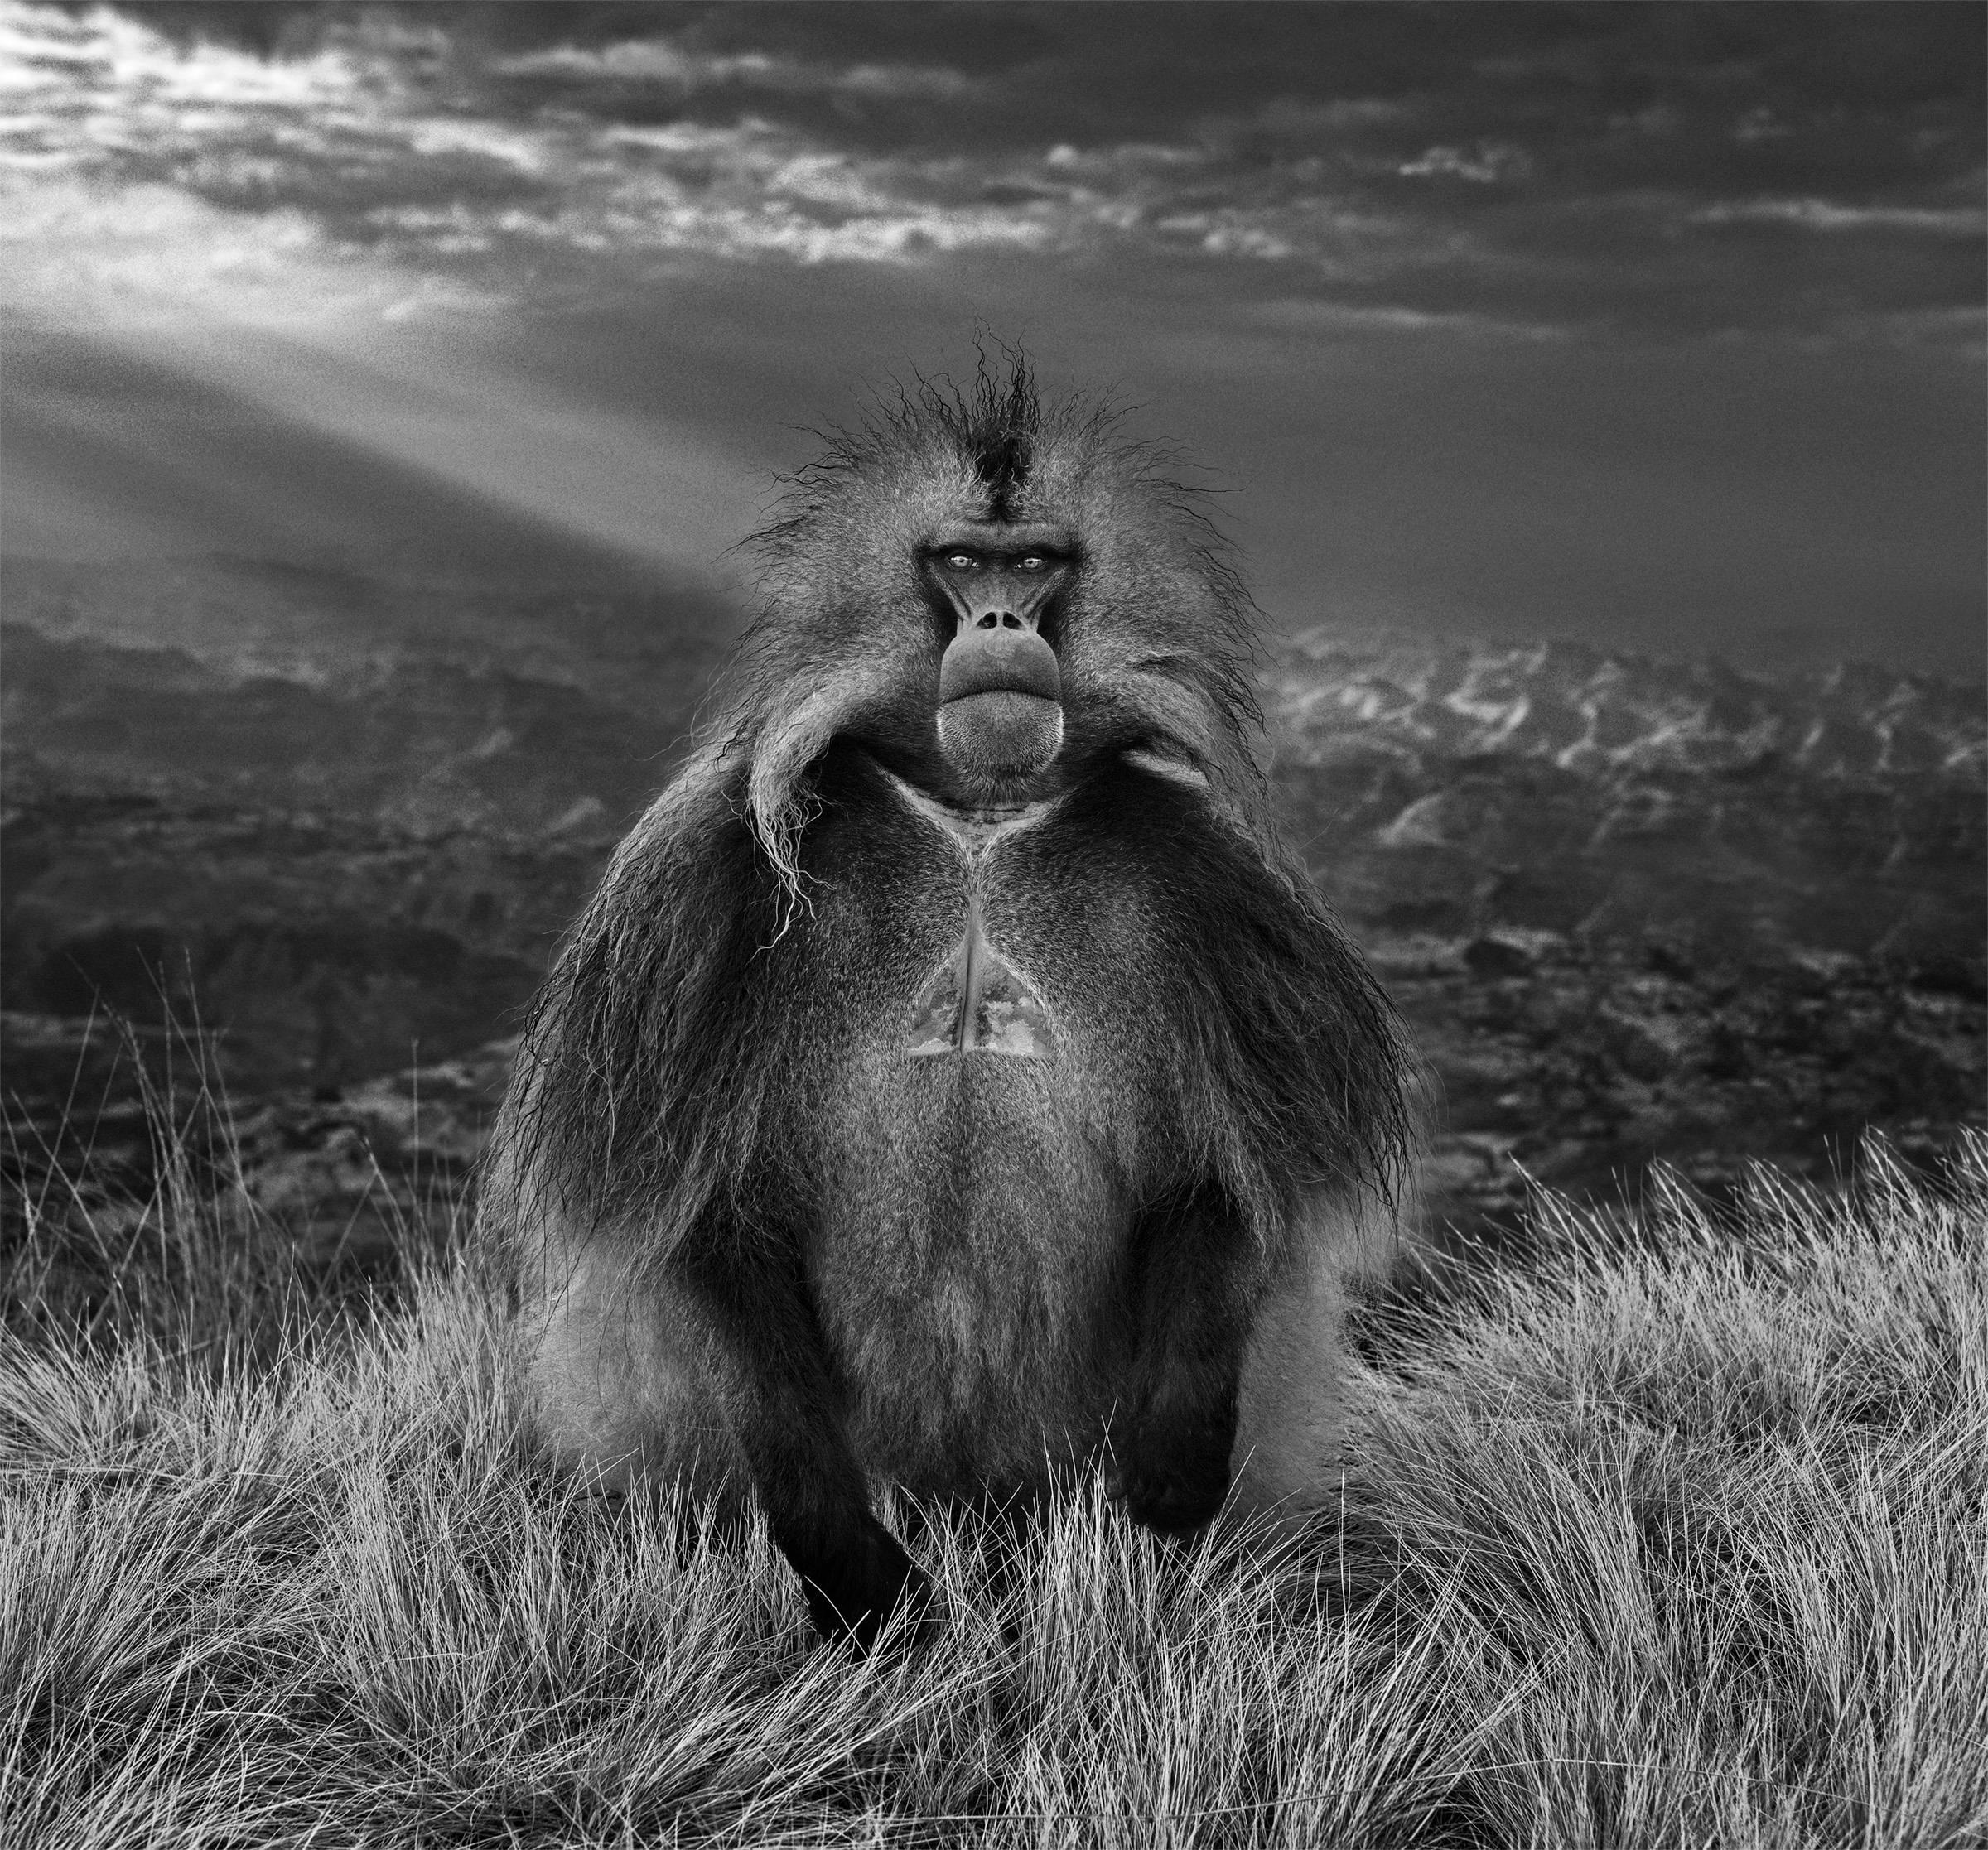 David Yarrow Black and White Photograph - Members Only